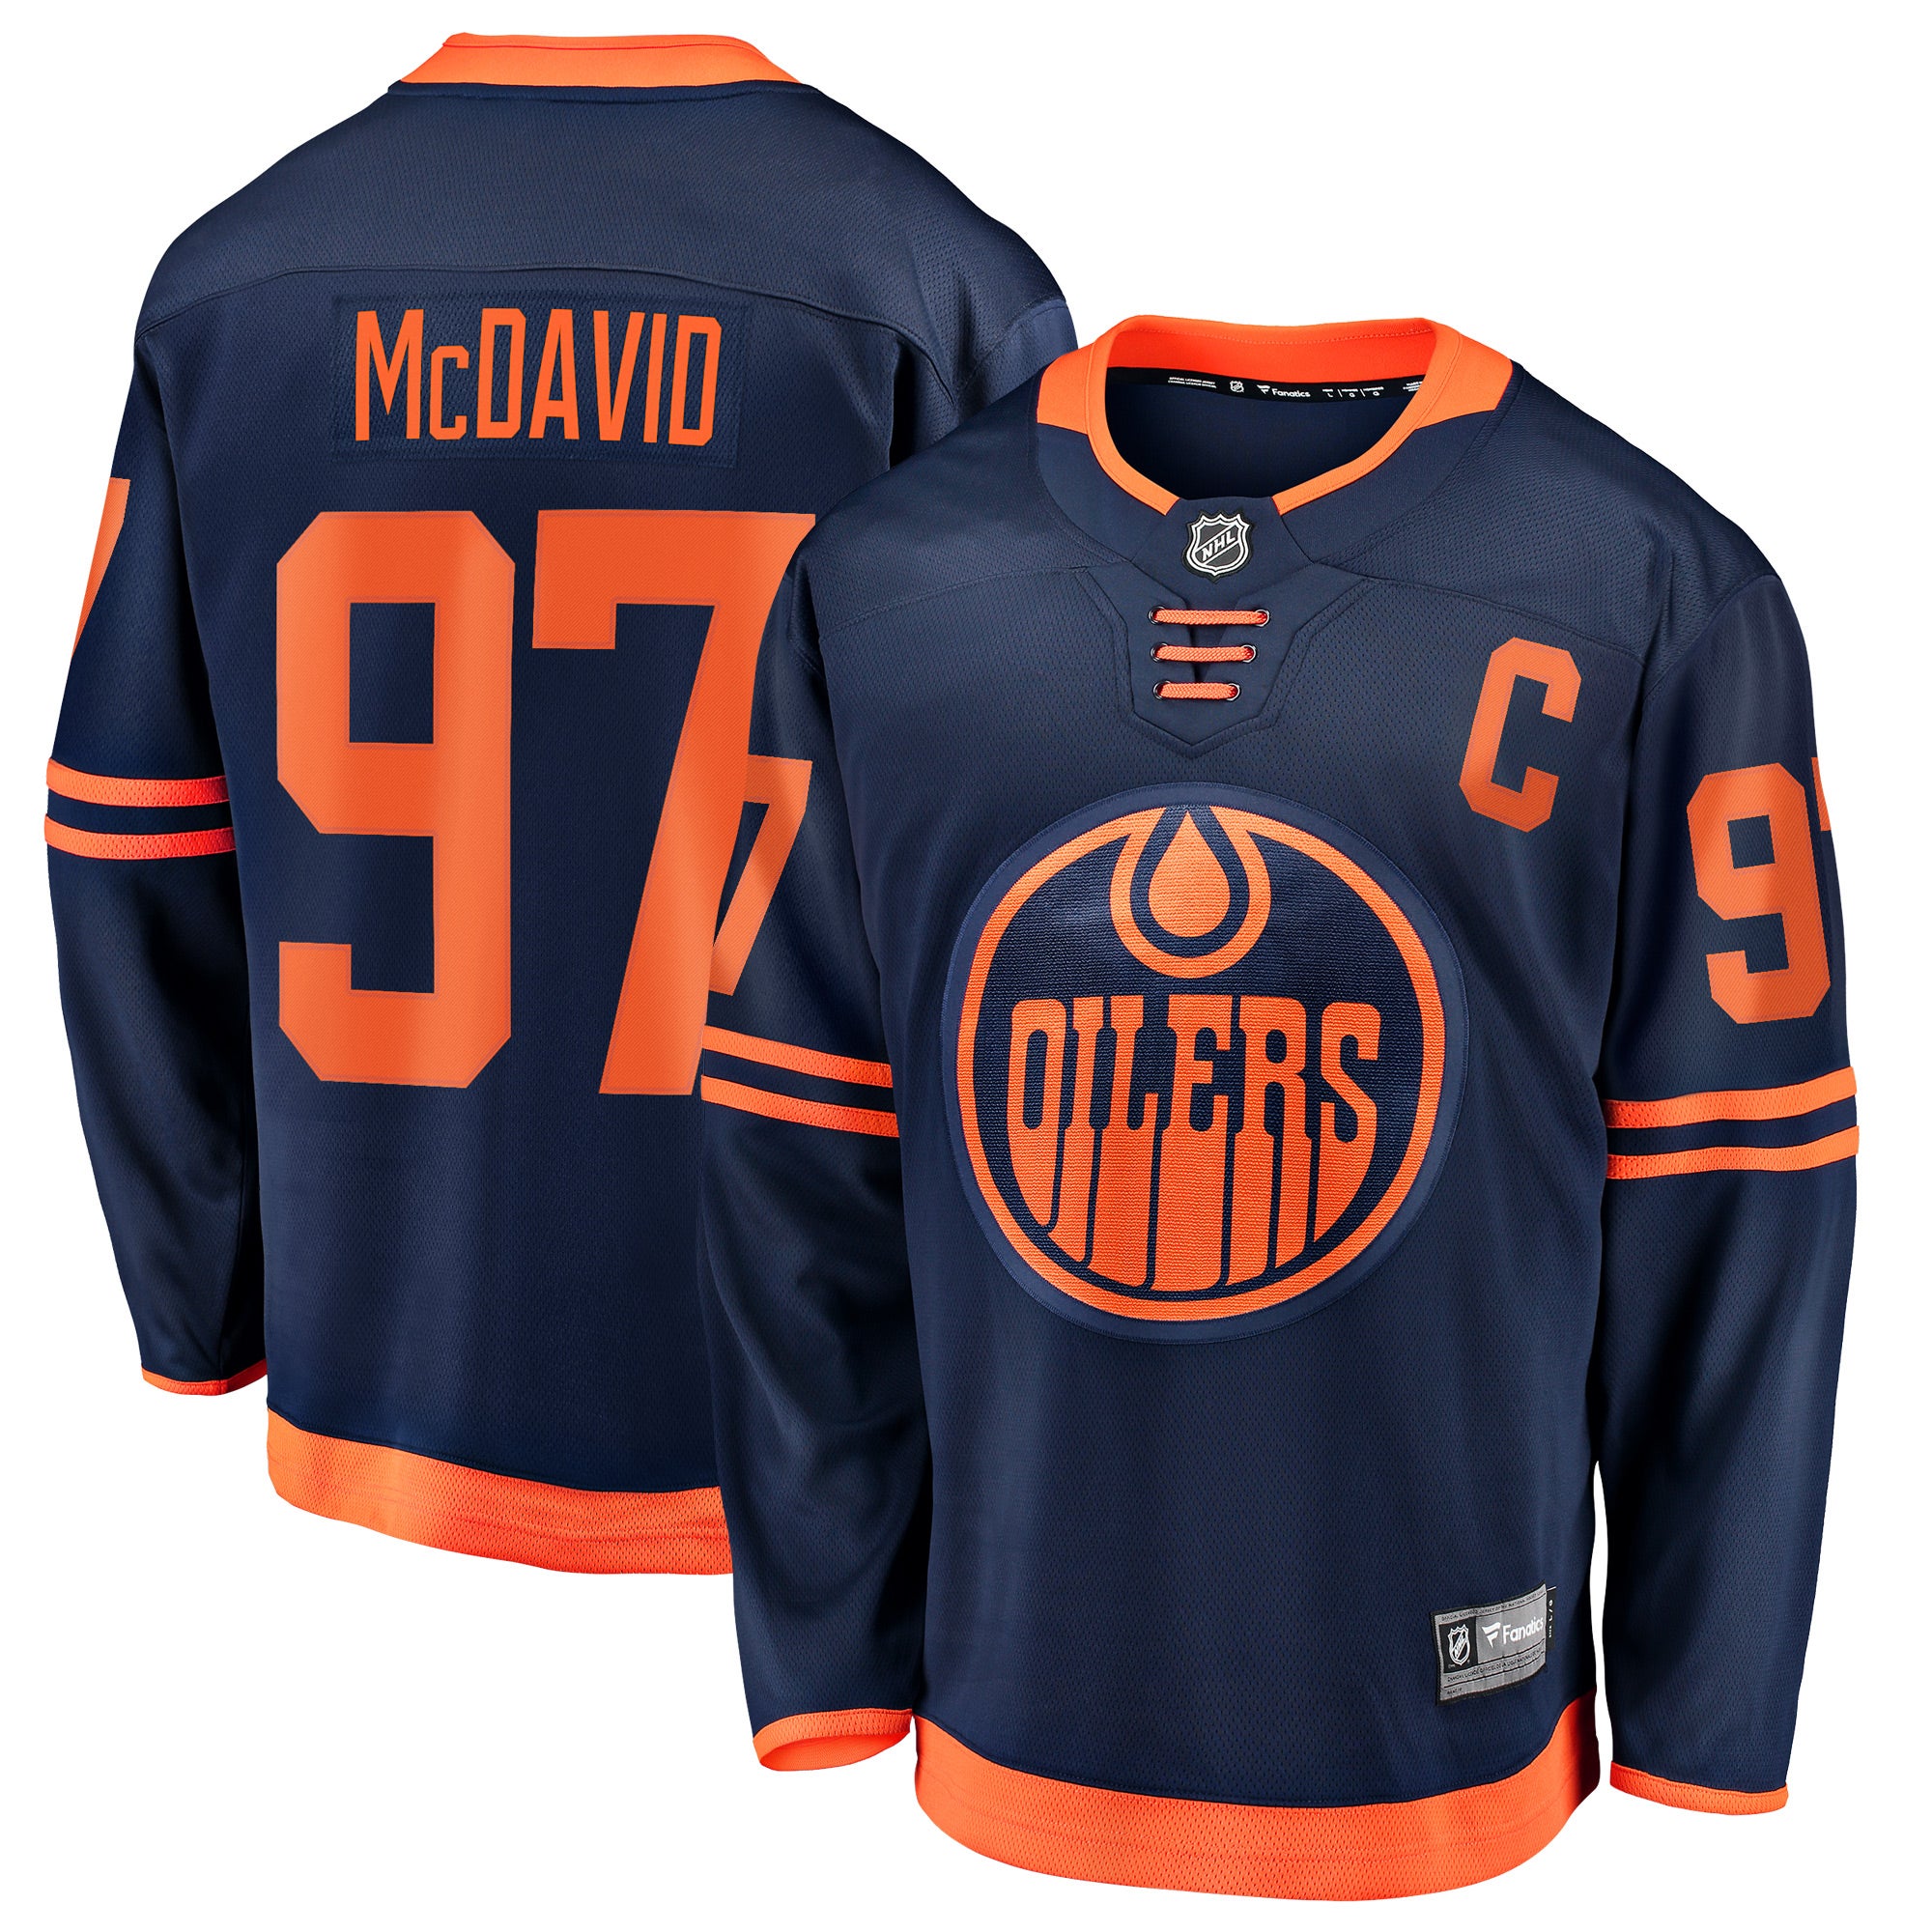 Edmonton Oilers Officially Licensed FANATICS NHL Jersey size: XS - 5XL